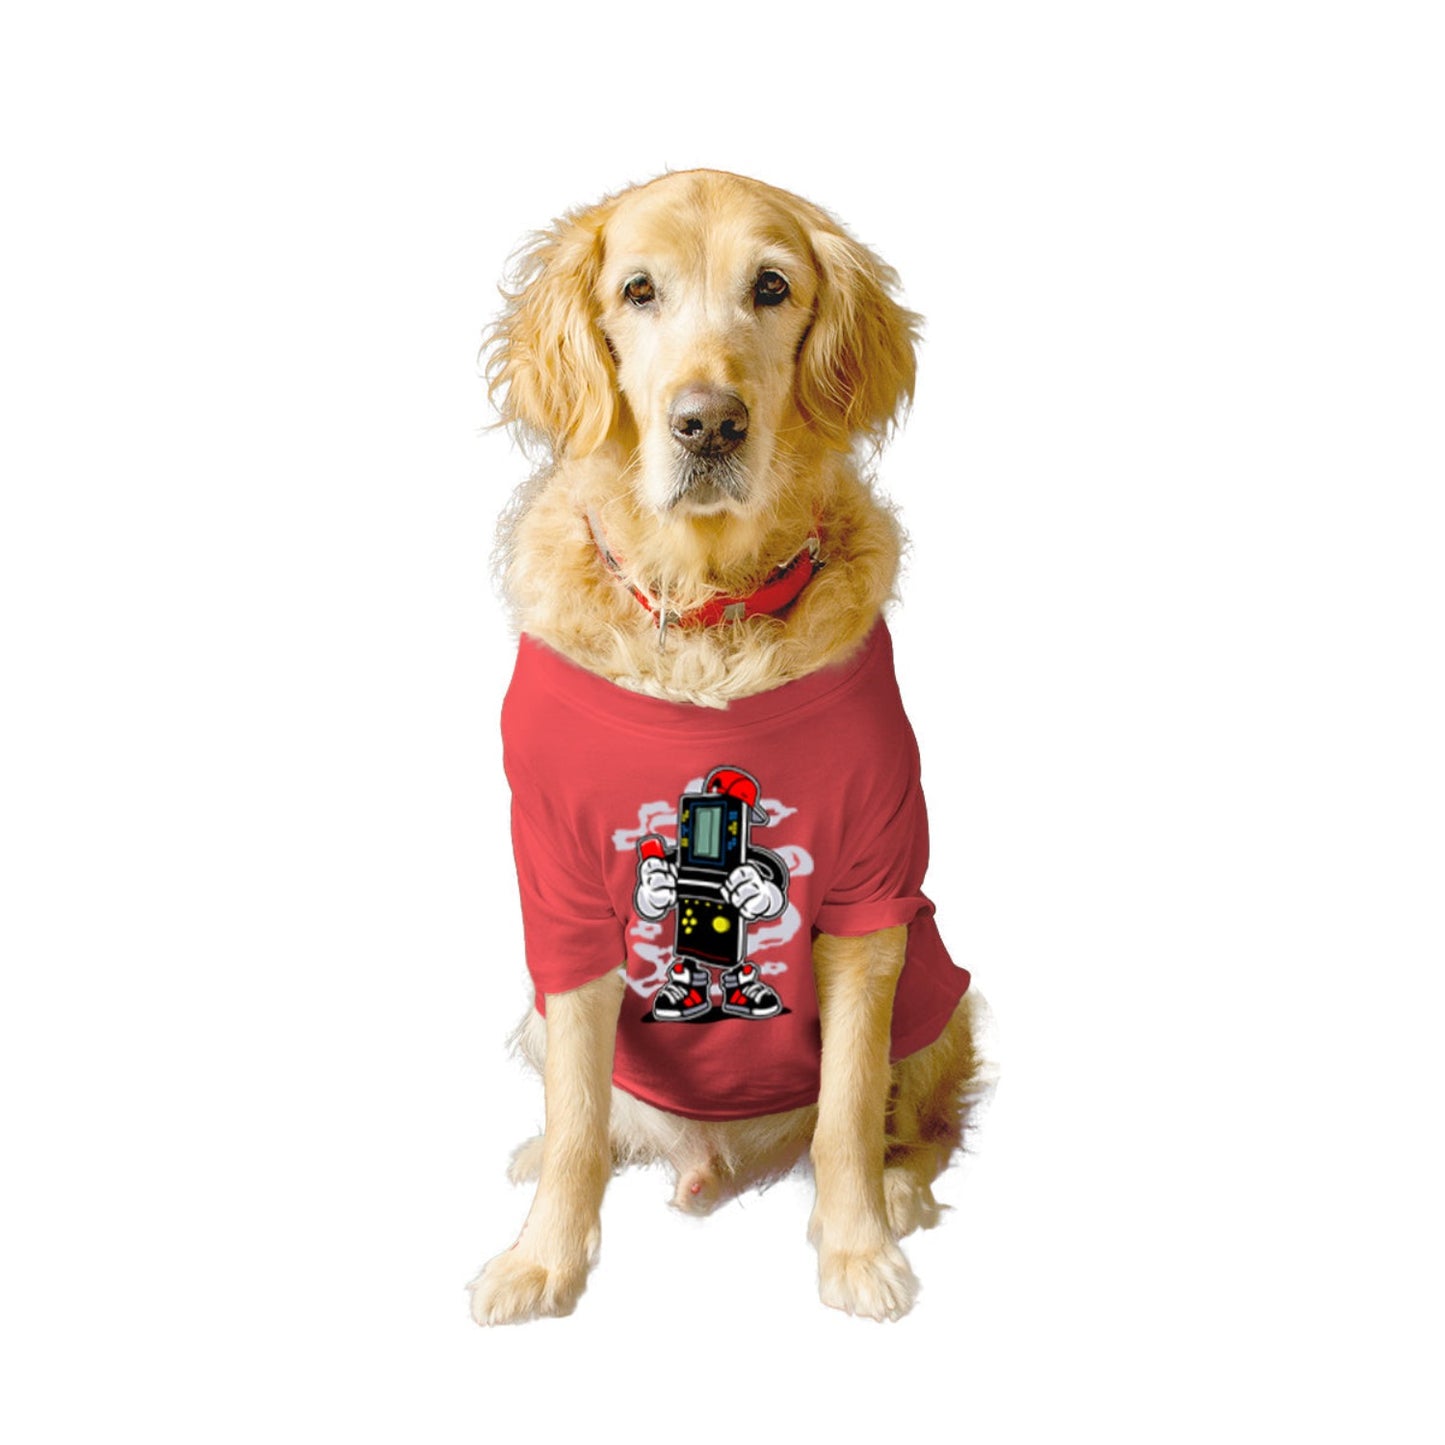 Ruse XX-Small (Chihuahuas, Papillons) / Poppy Red Ruse Basic Crew Neck "BRICK GAMERS" Printed Half Sleeves Dog Tee